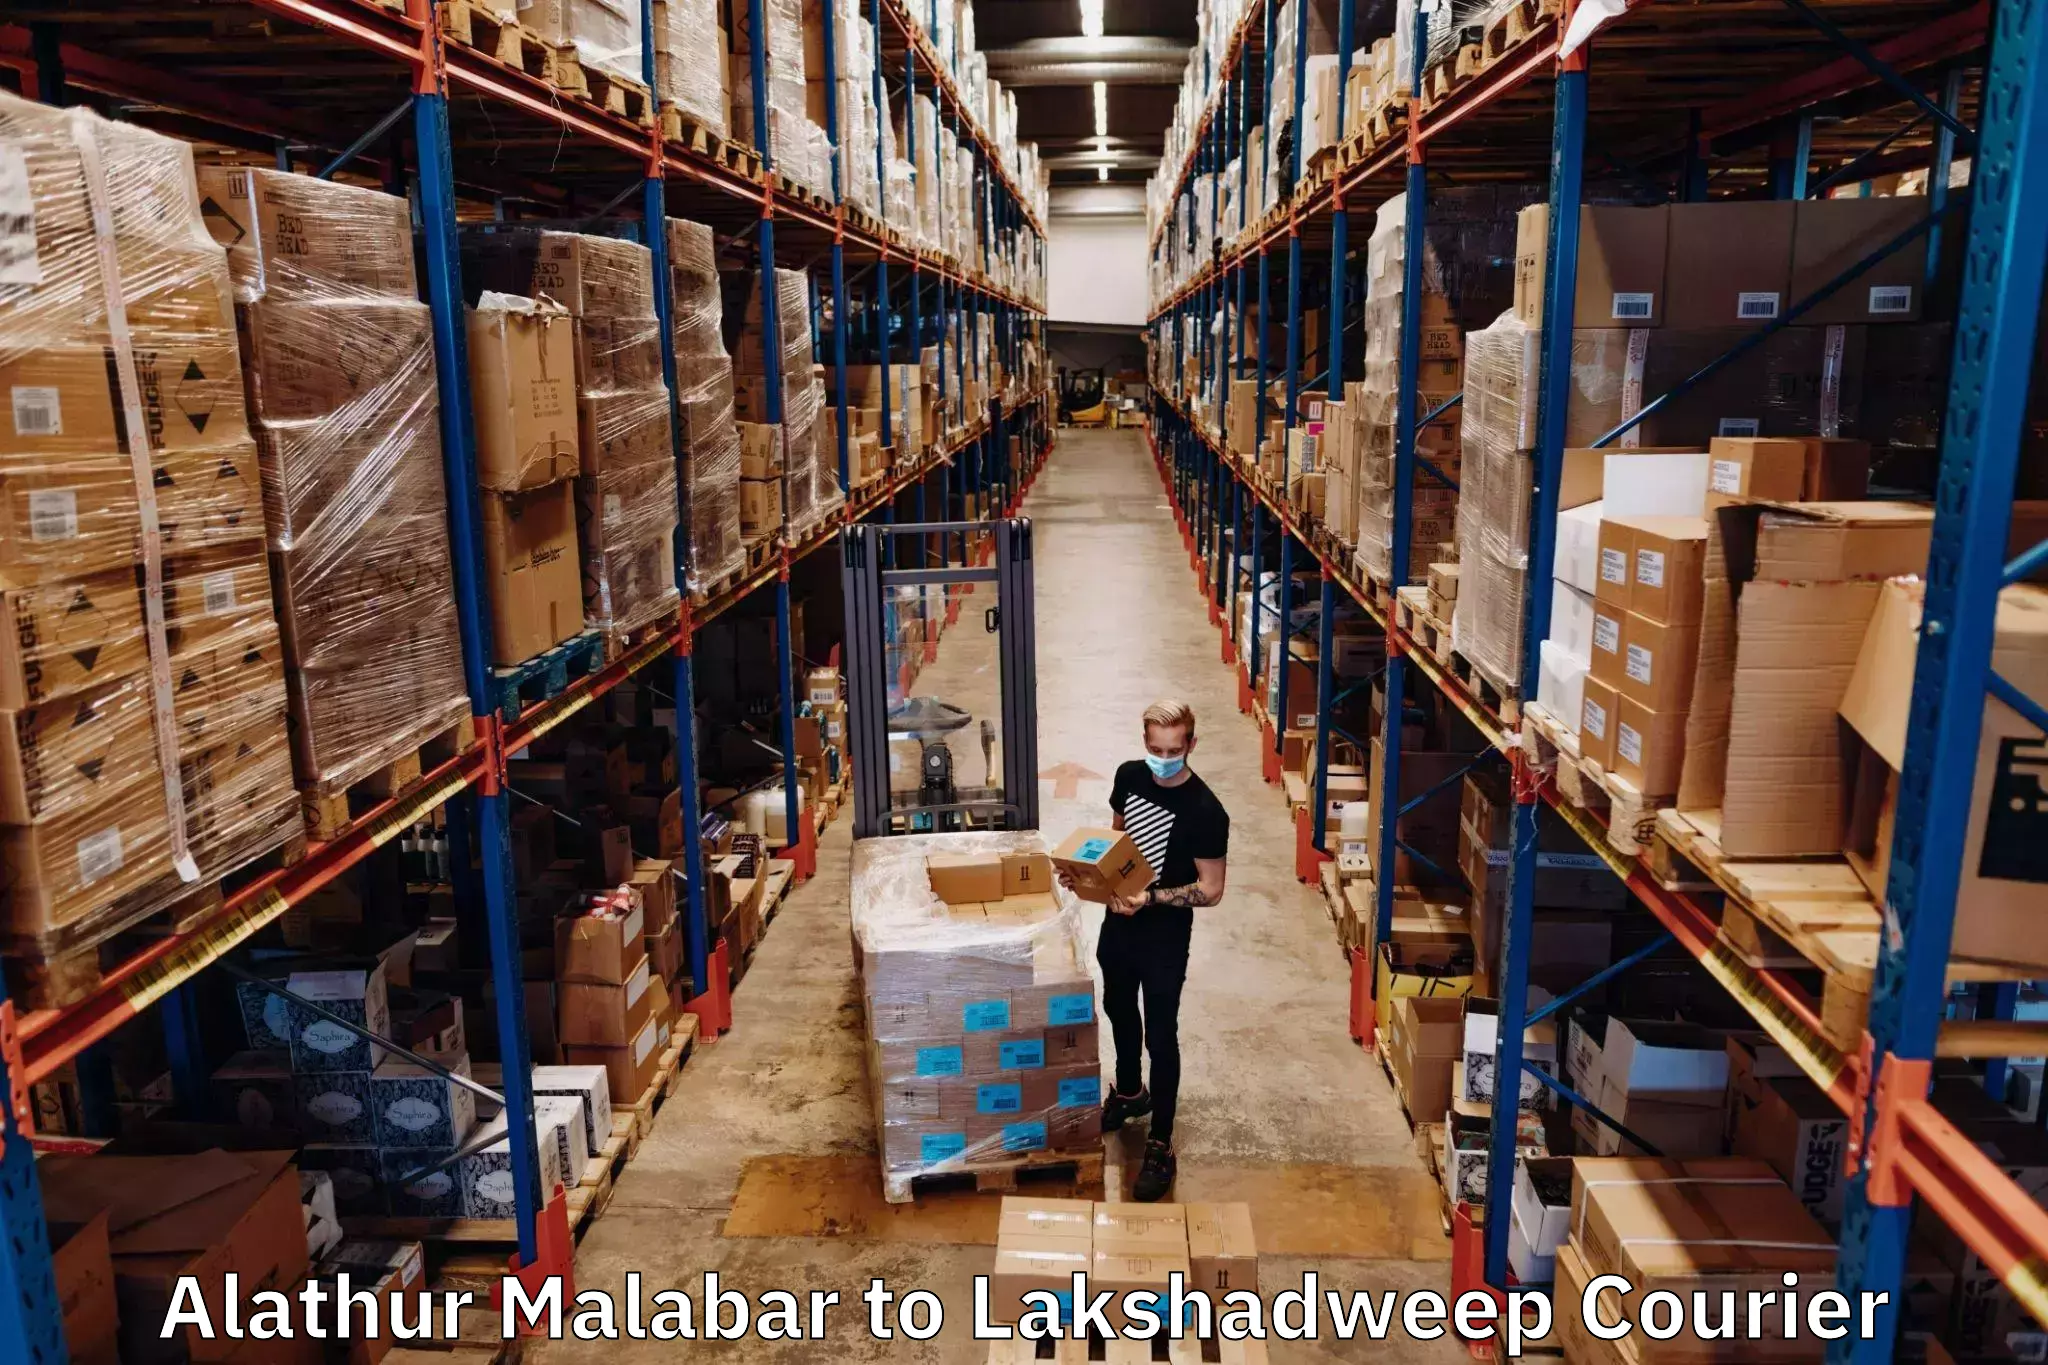 Corporate courier solutions Alathur Malabar to Lakshadweep